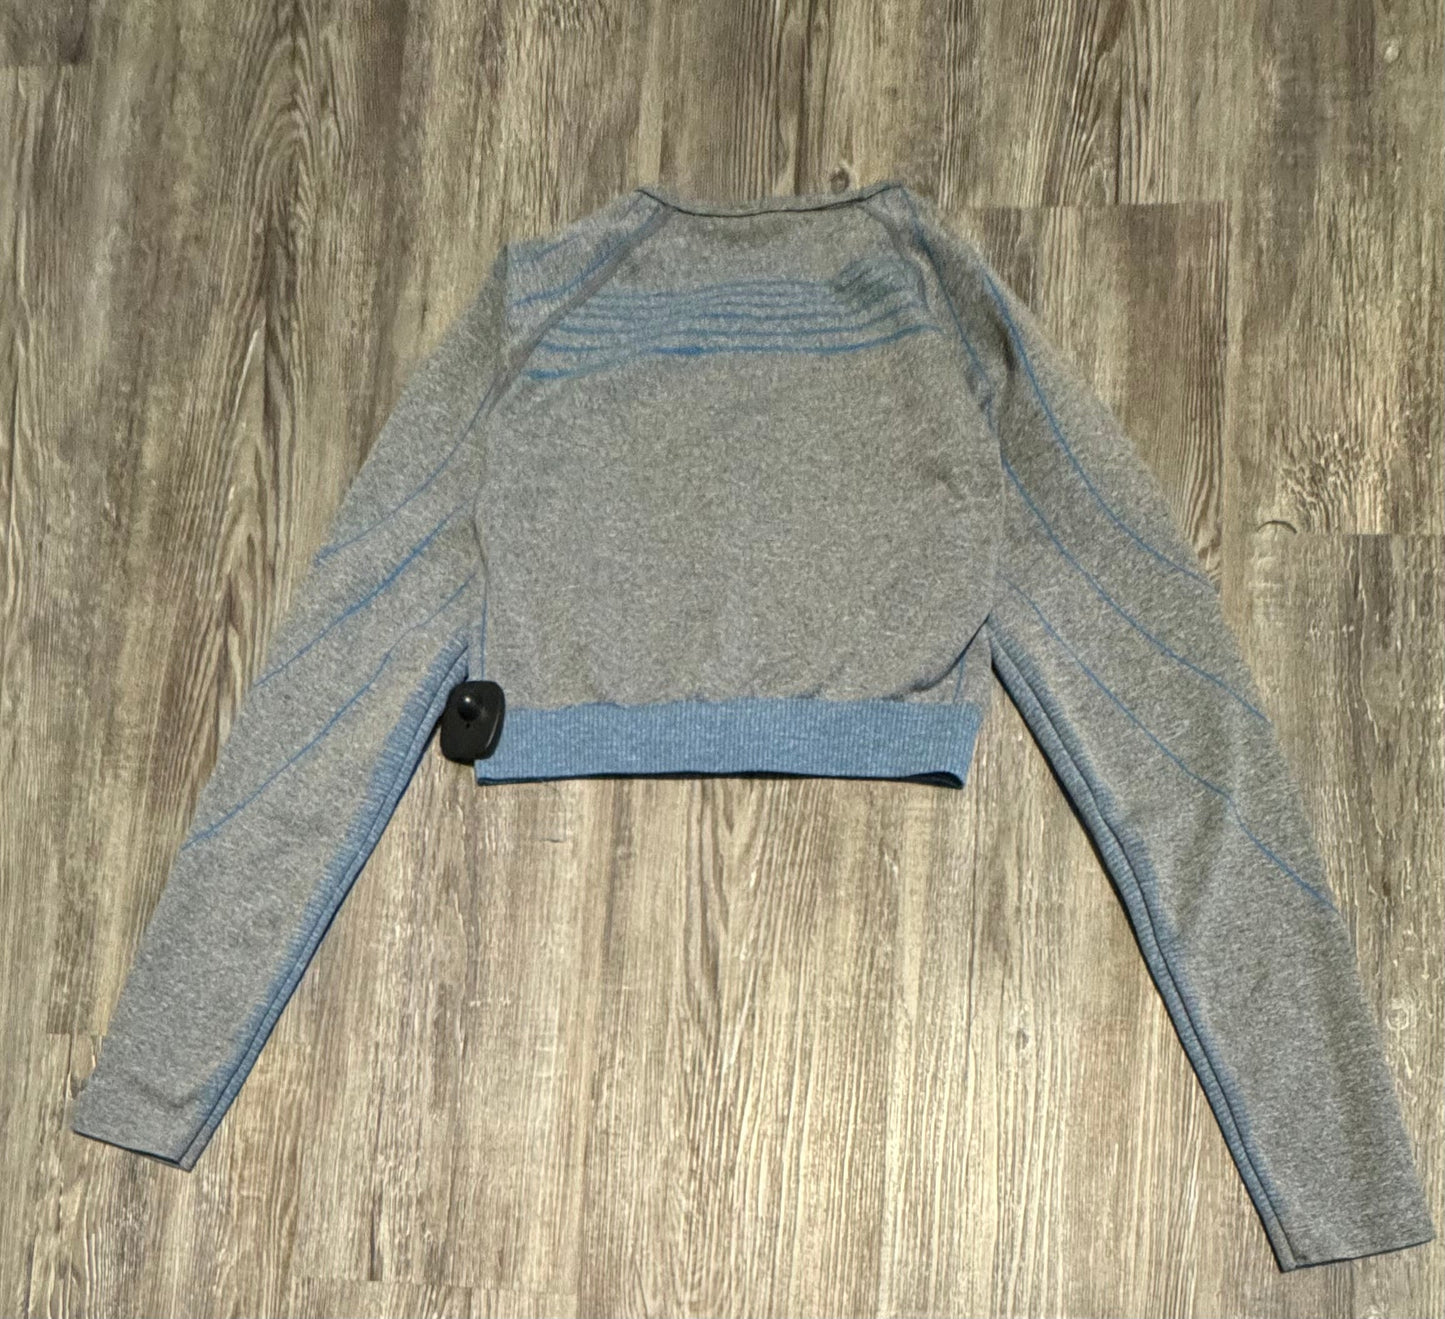 Athletic Top Long Sleeve Crewneck By Clothes Mentor  Size: M